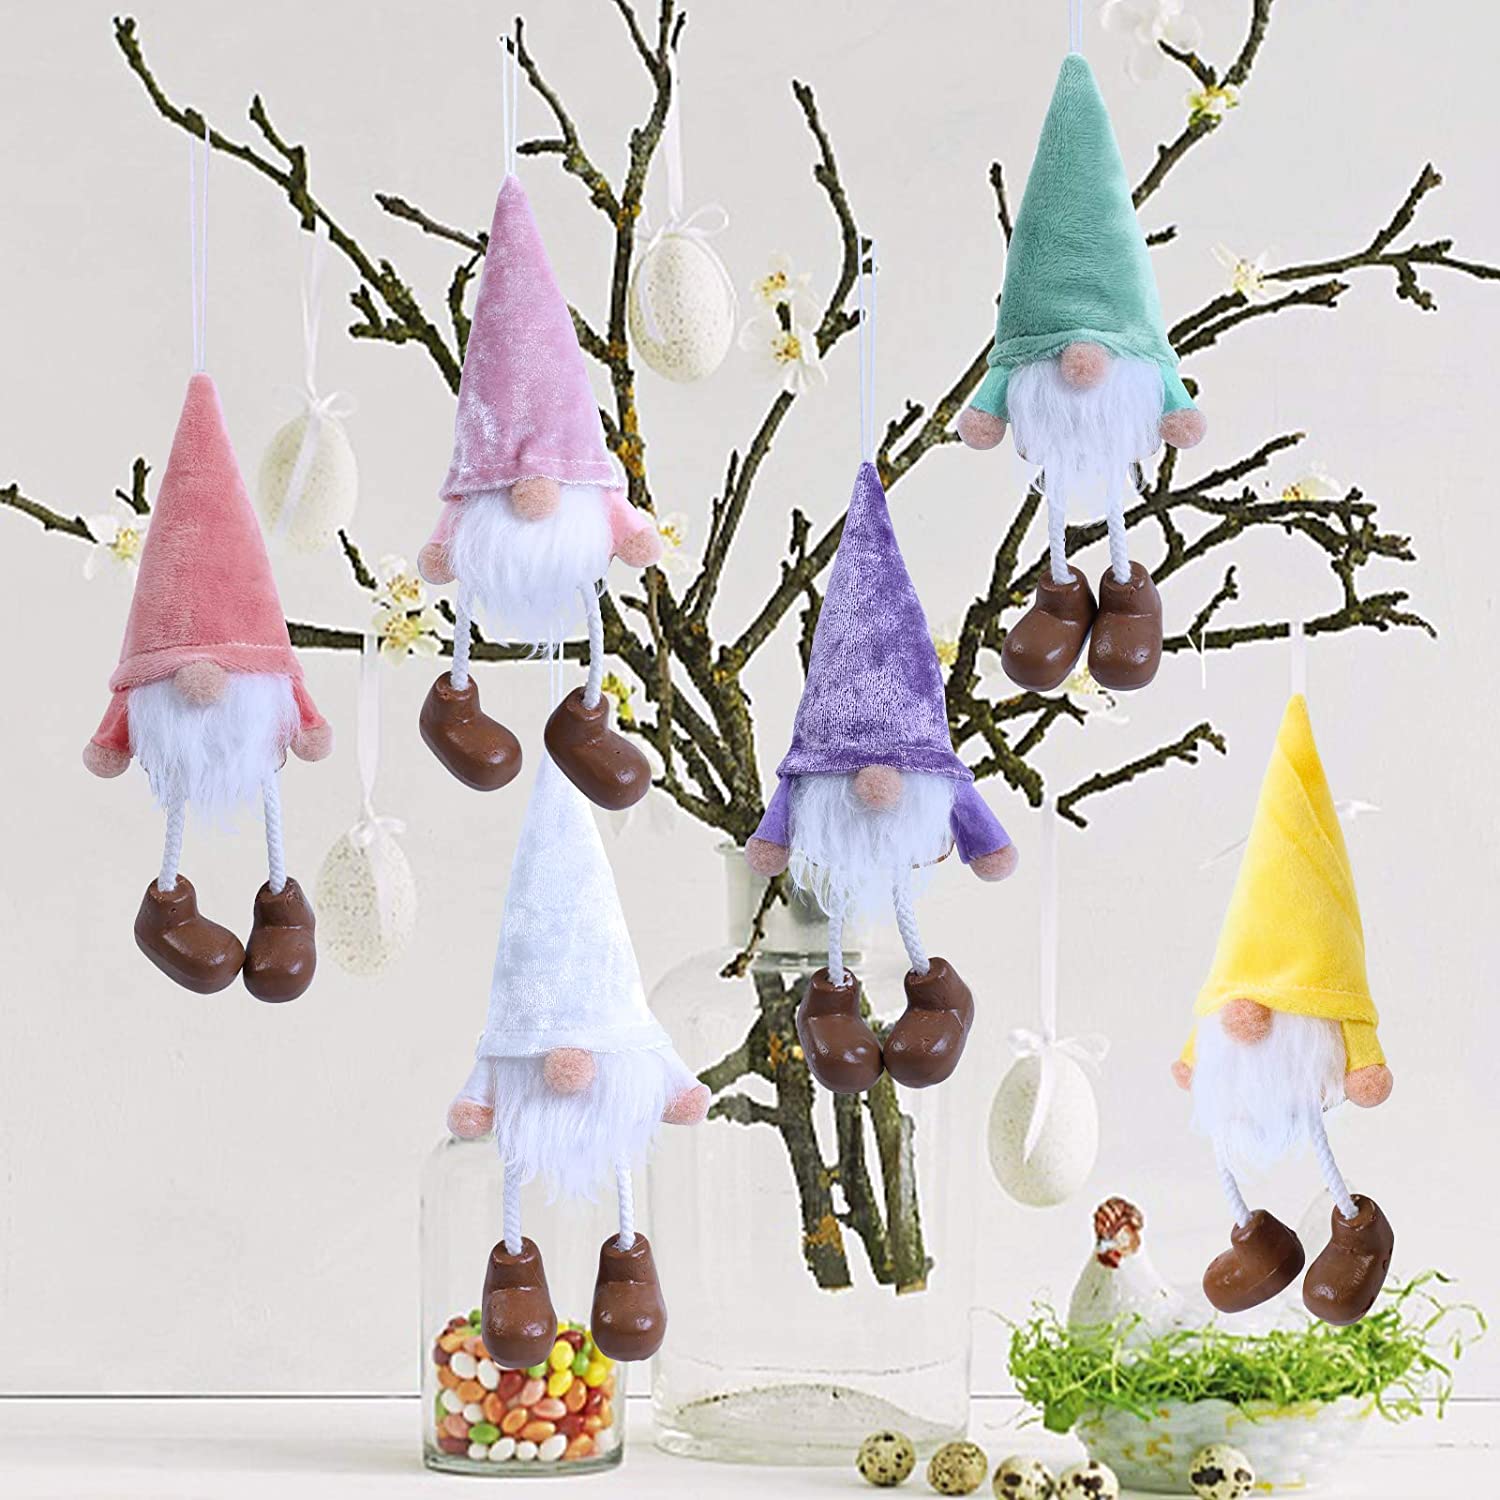 Newest Spring Gnomes Ornaments for Easter Decorations 6 pack, Swedish Tomte for Spring Decorations Stuffed Gnome Gift of Apartment Decor, Tomte Gnomes Plush of holiday Decor for Spring and Easter